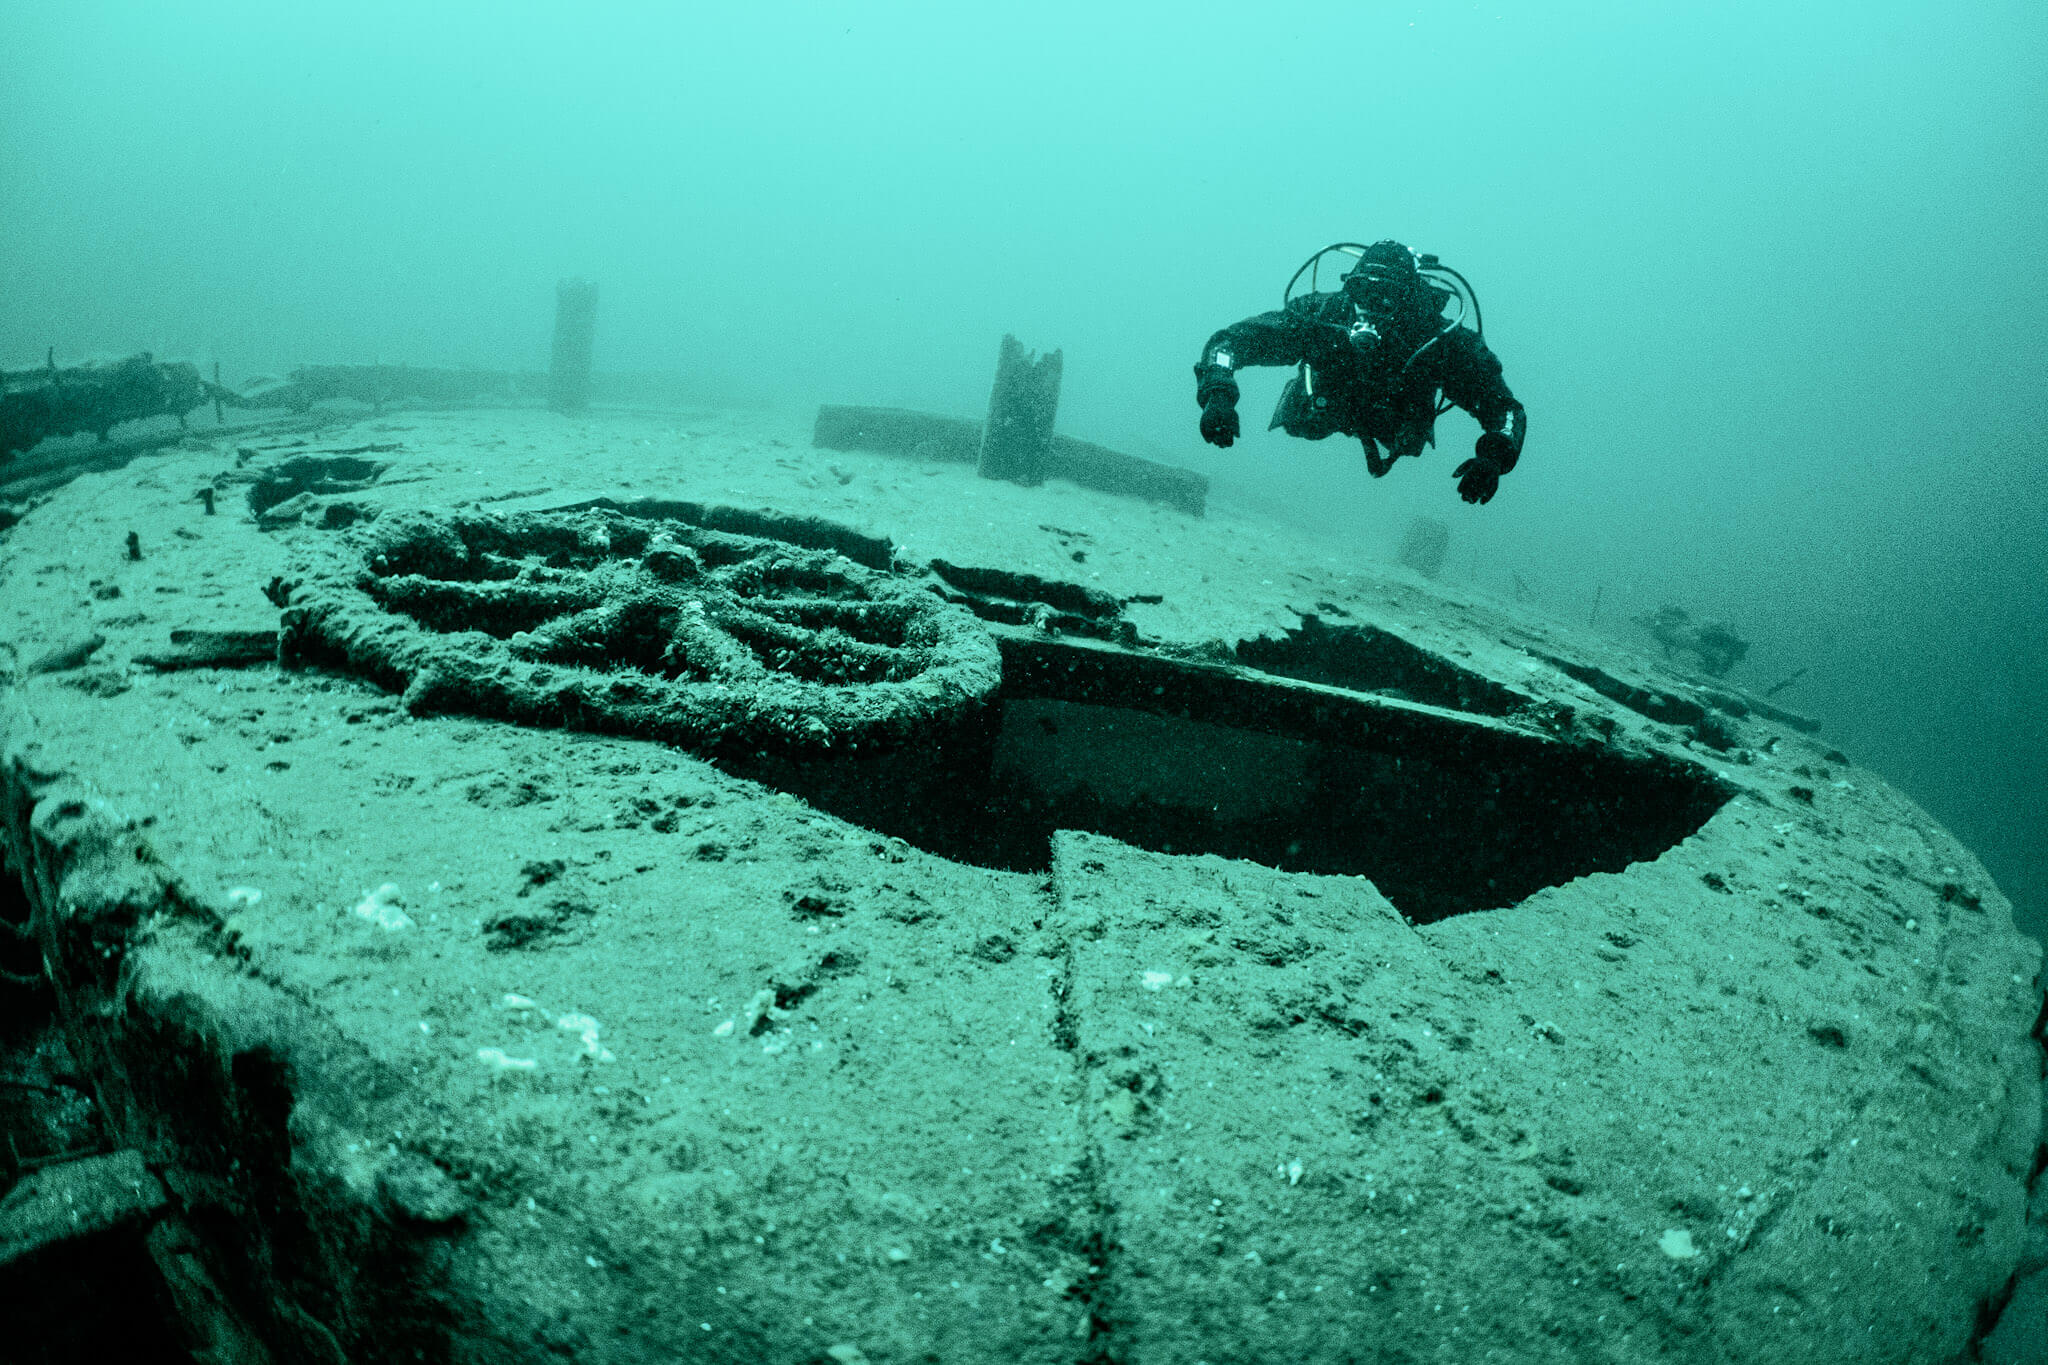 Scuba diver examines the wheel of the Kinghorn shipwreck in Rockport, Ontario